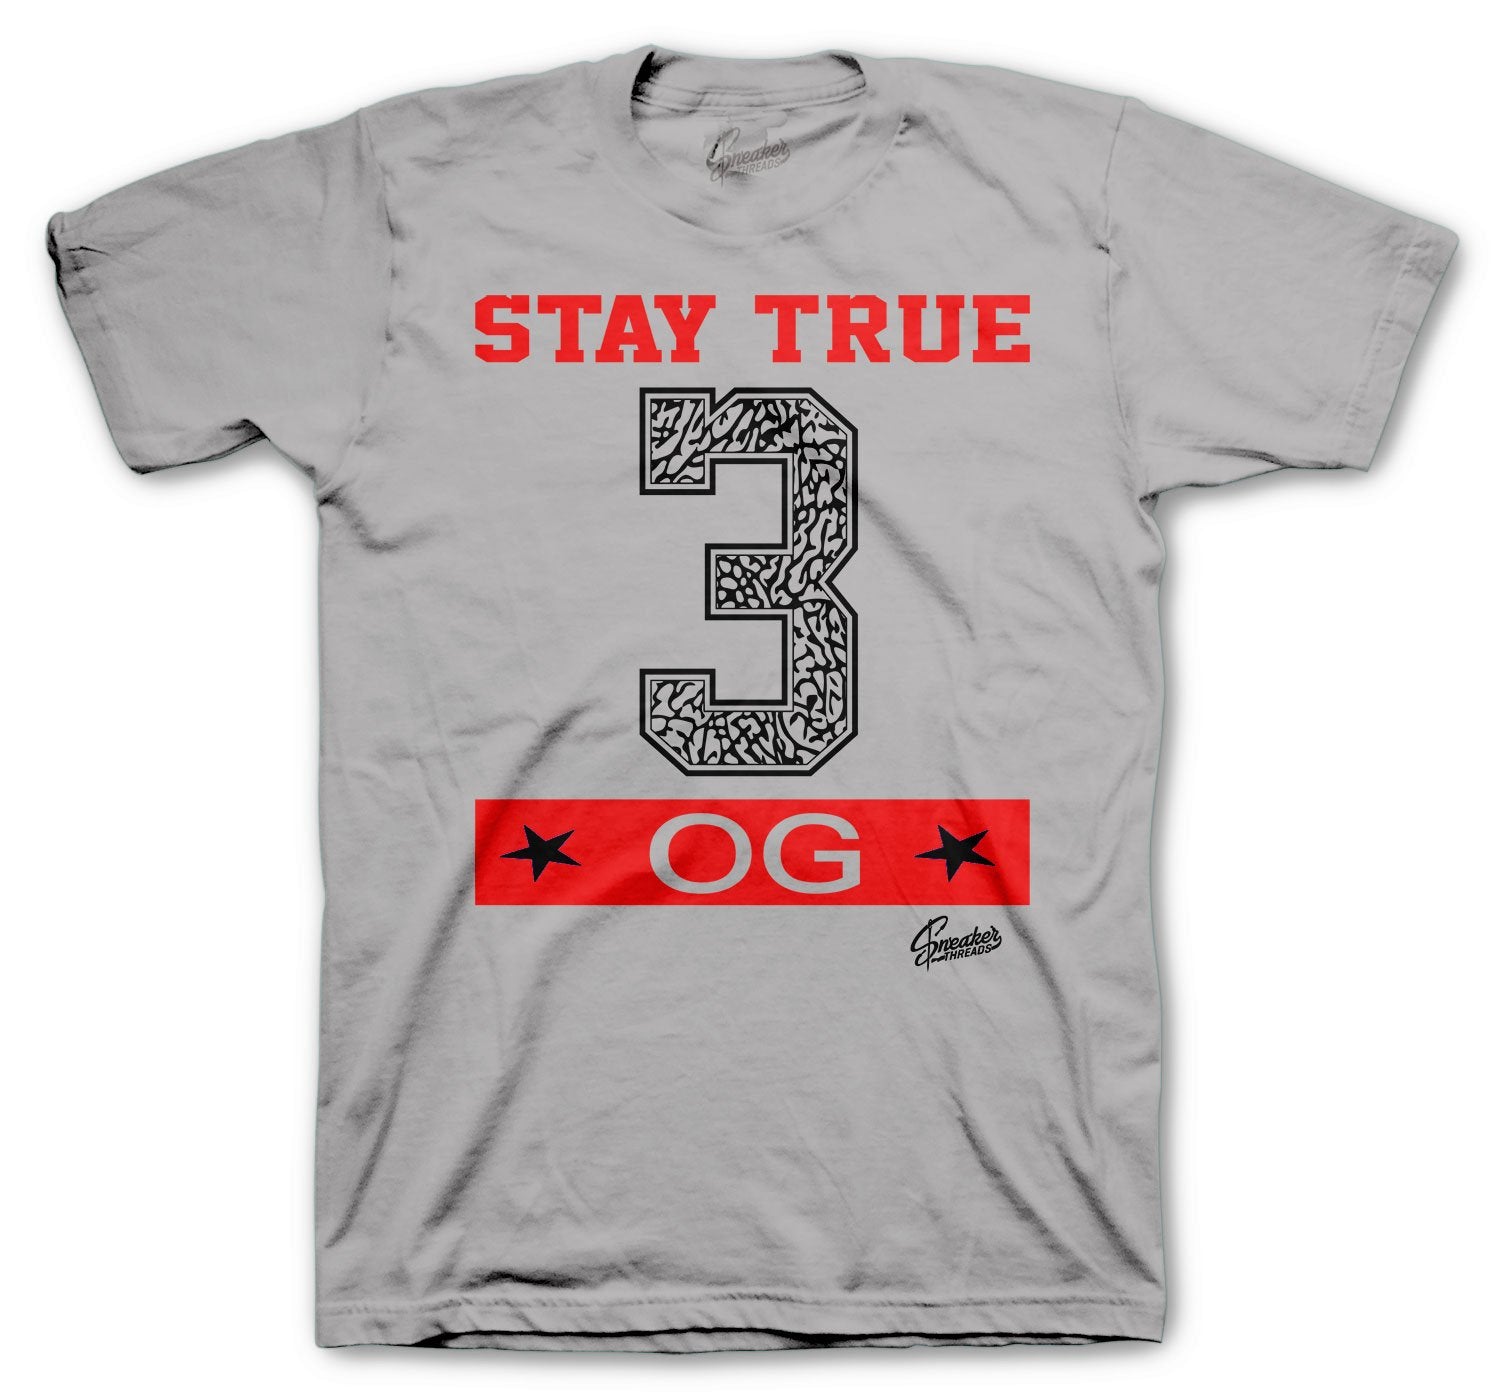 t shirt collection designed to match the sneaker collection Jordan 3 red cement sneakers